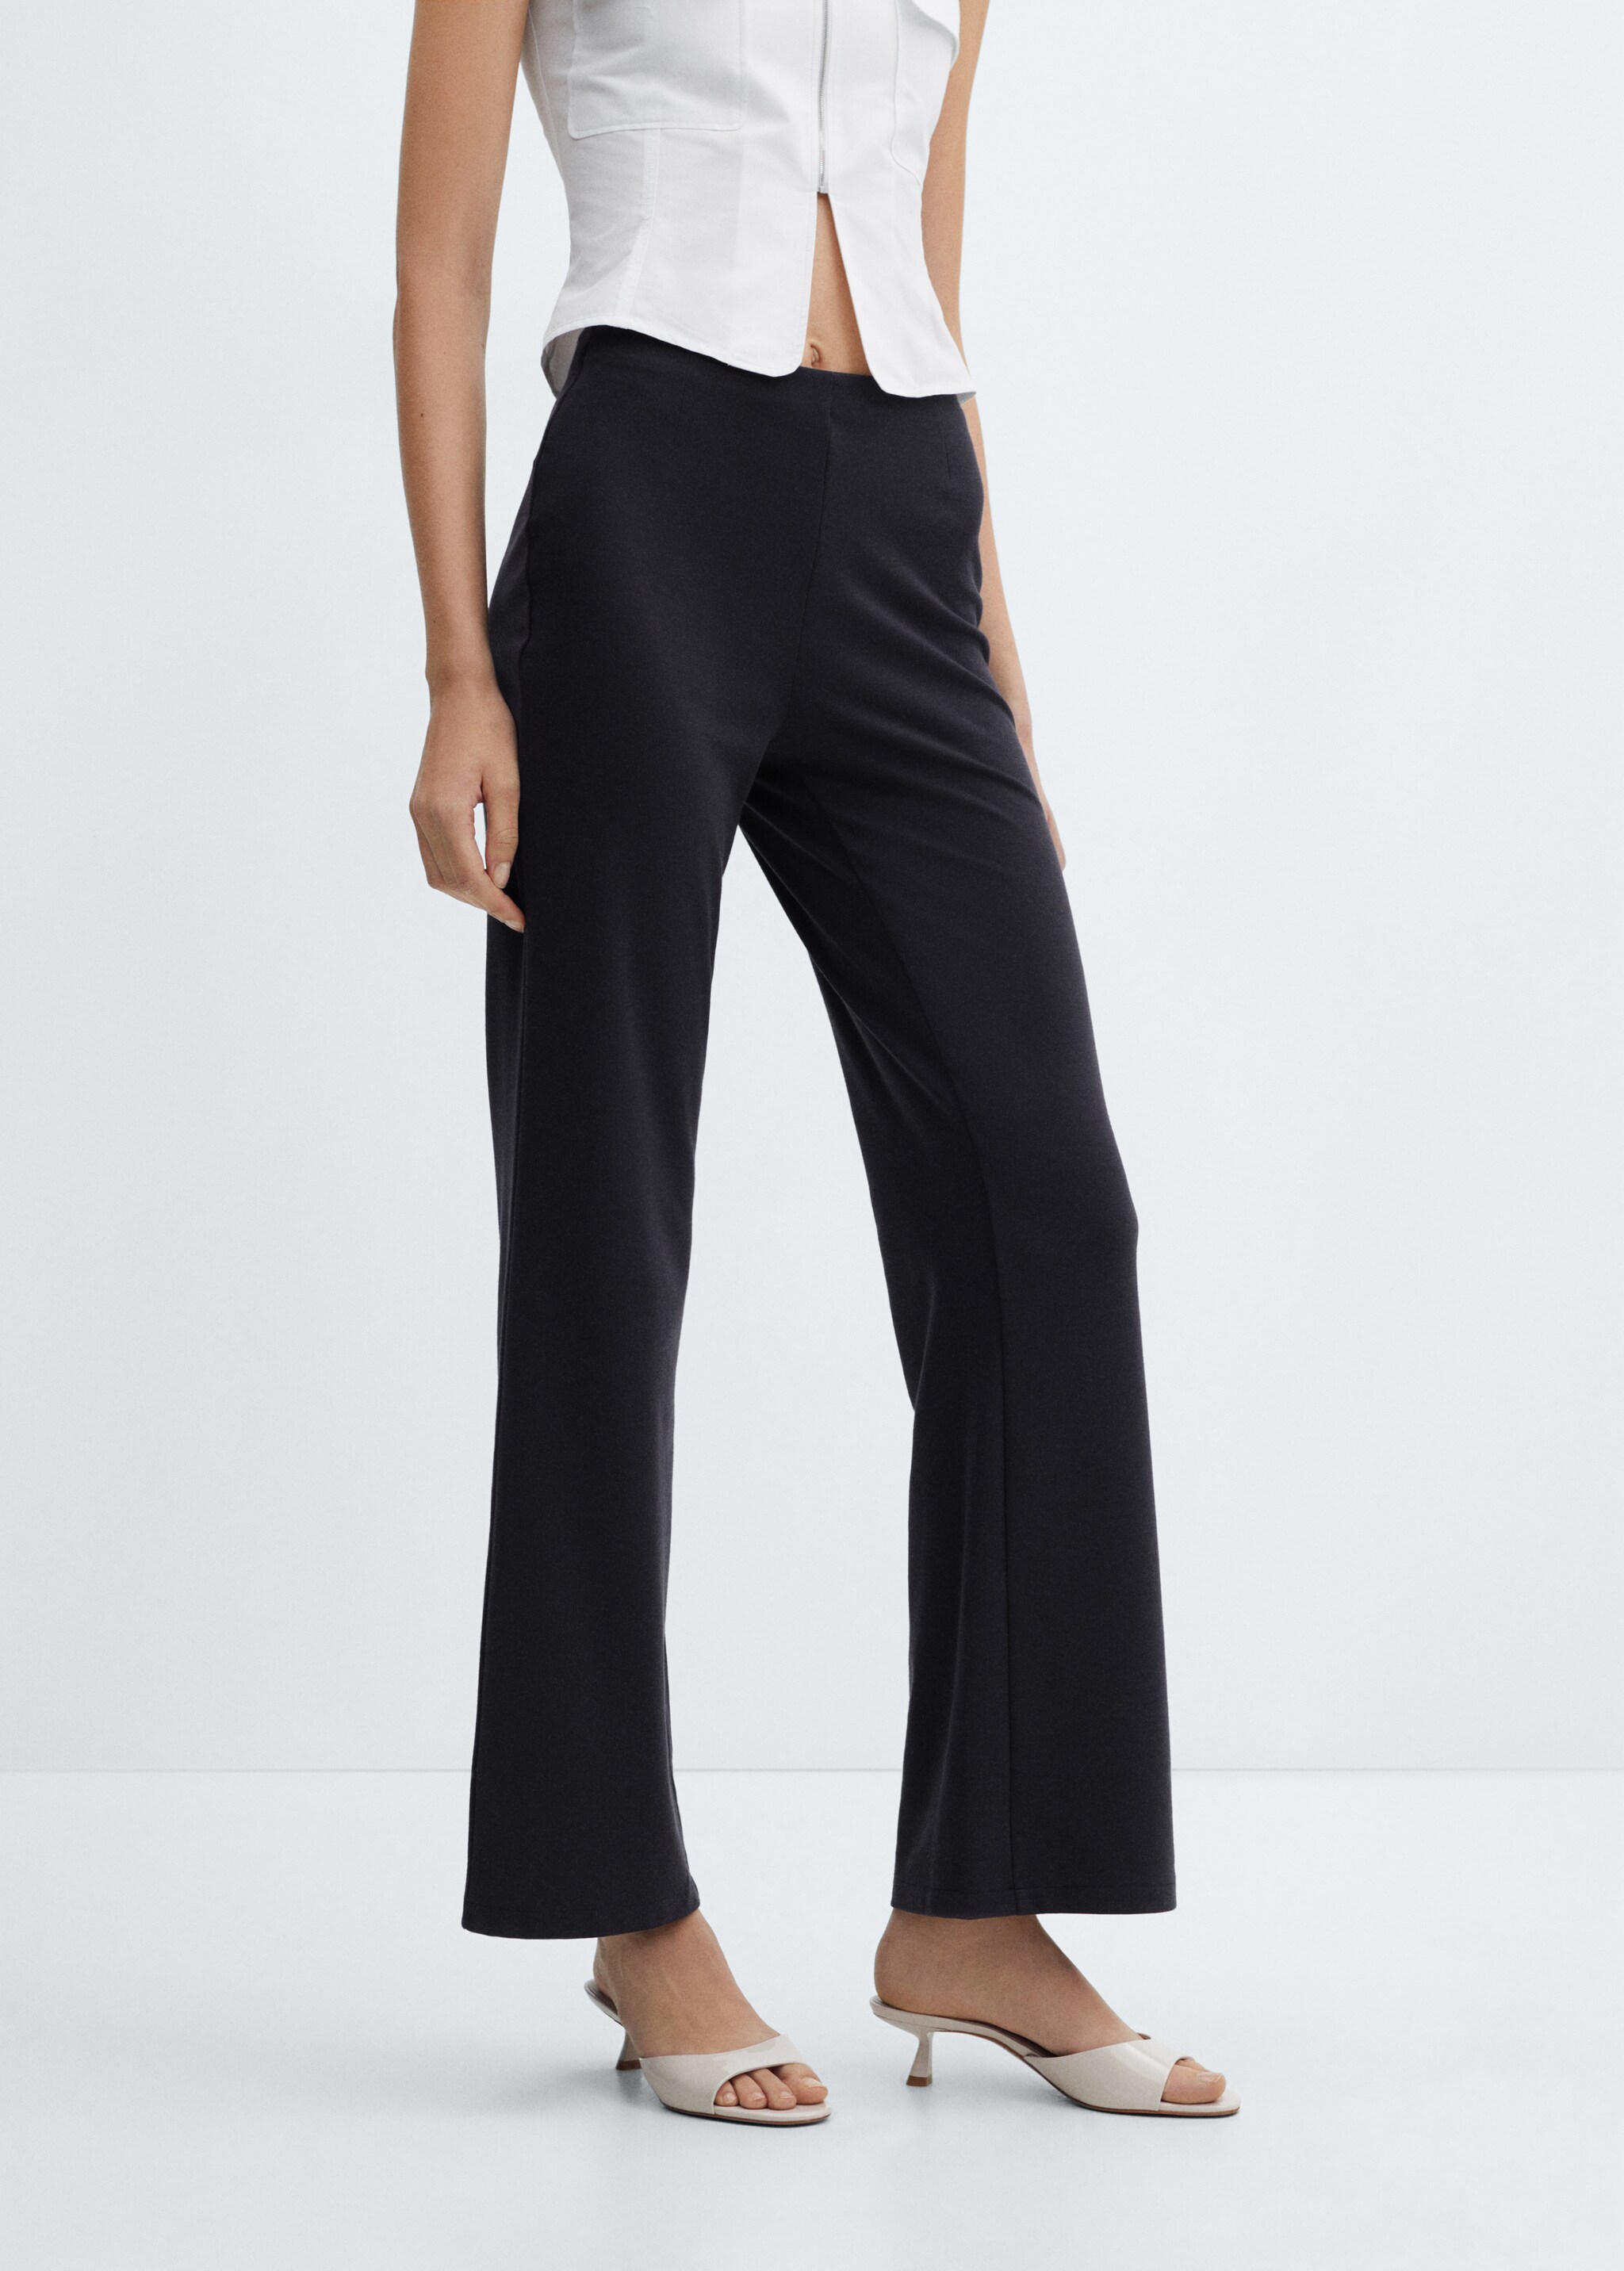 High rise knitted trousers - Medium plane